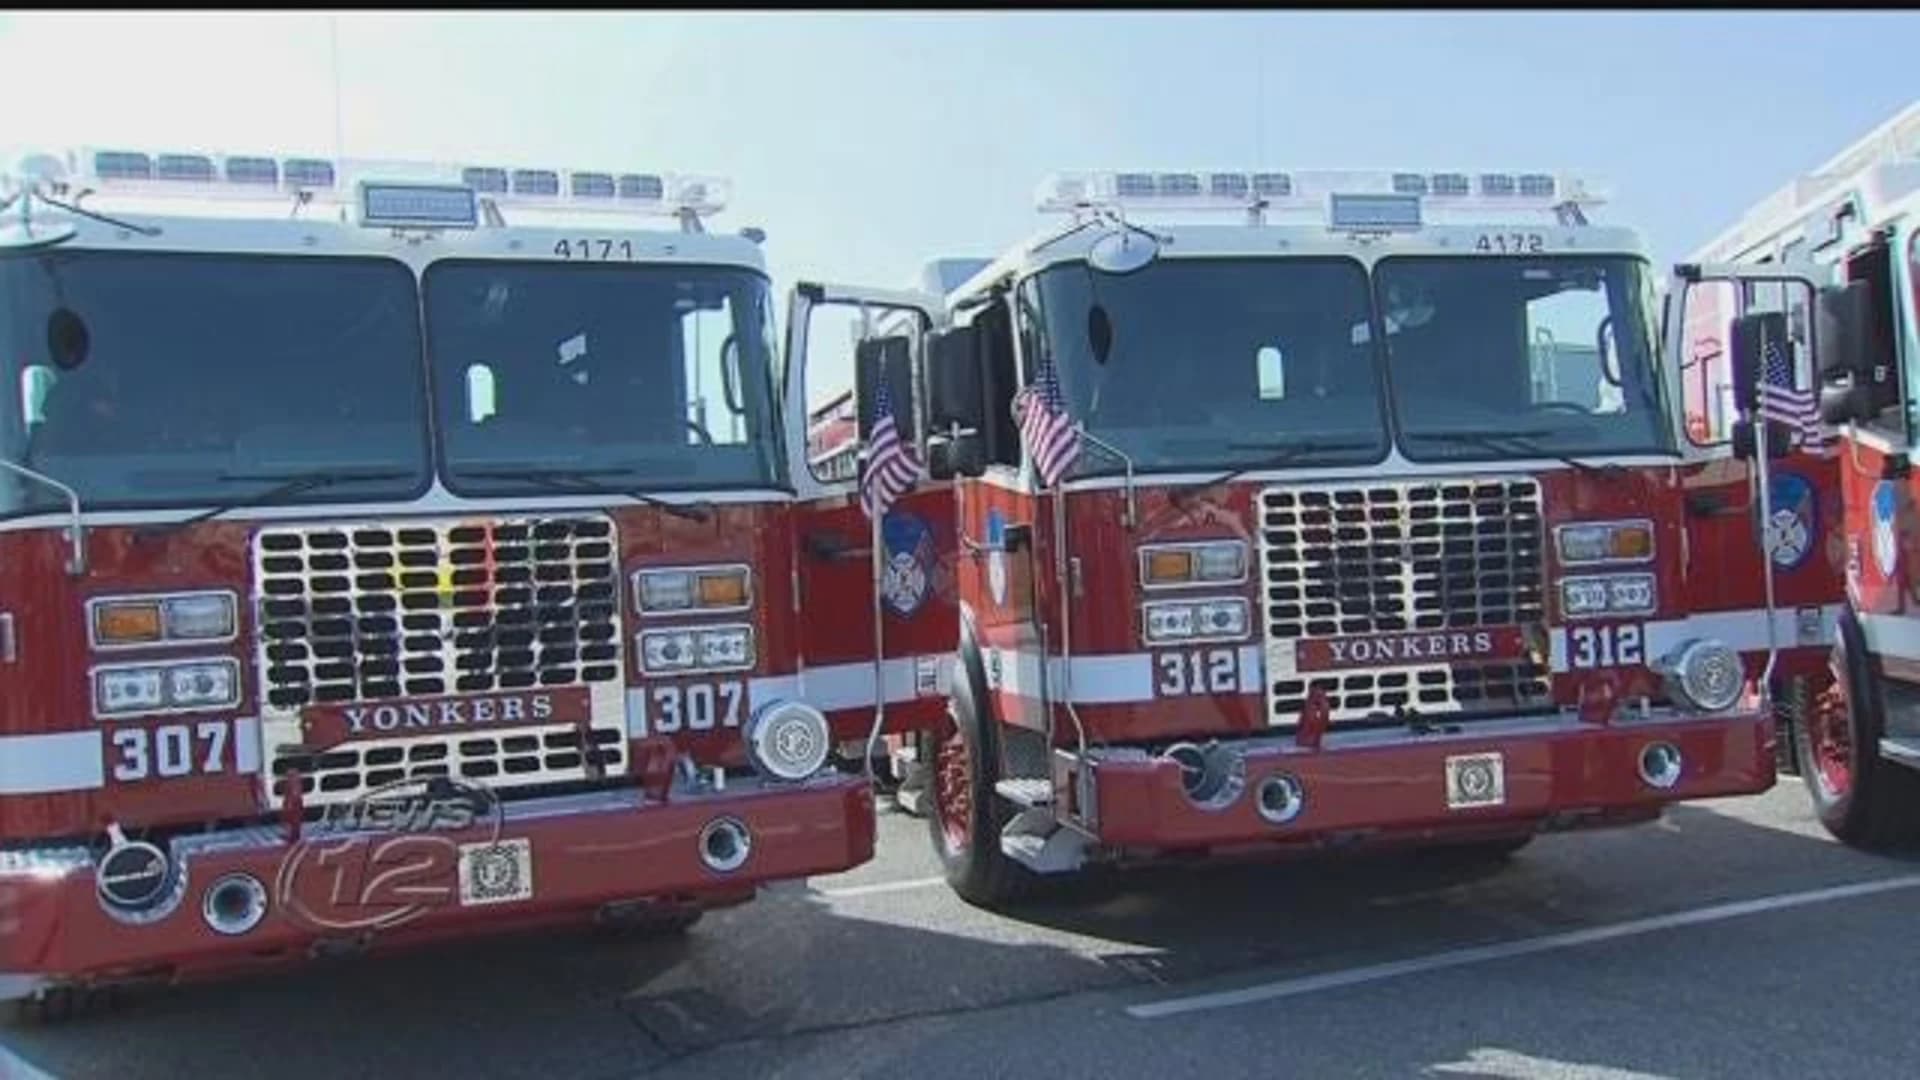 Yonkers to give Mount Vernon 2 firetrucks